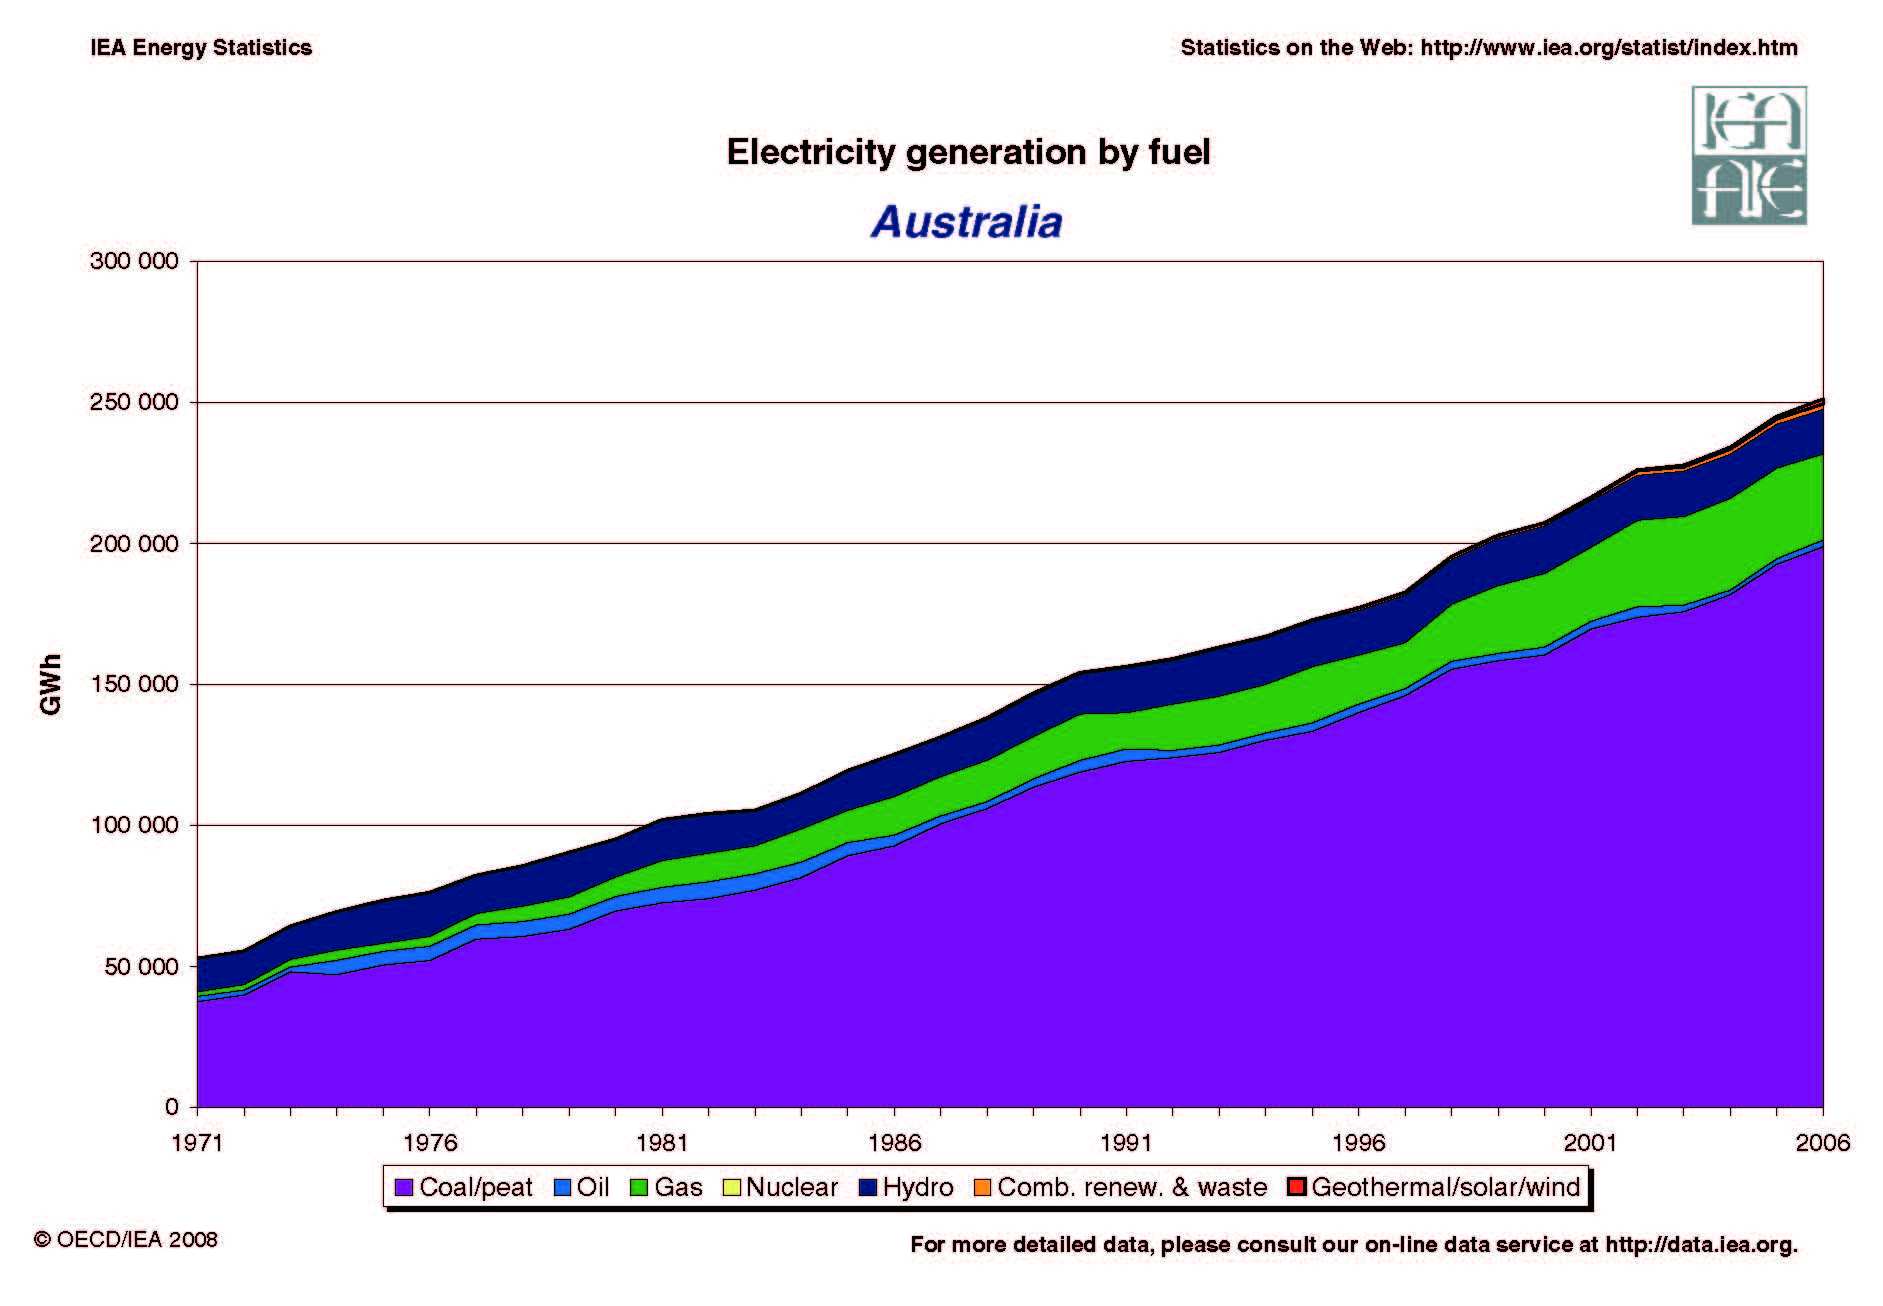 Australia Evolution of Electricity Generation by Fuel 1971 - 2005